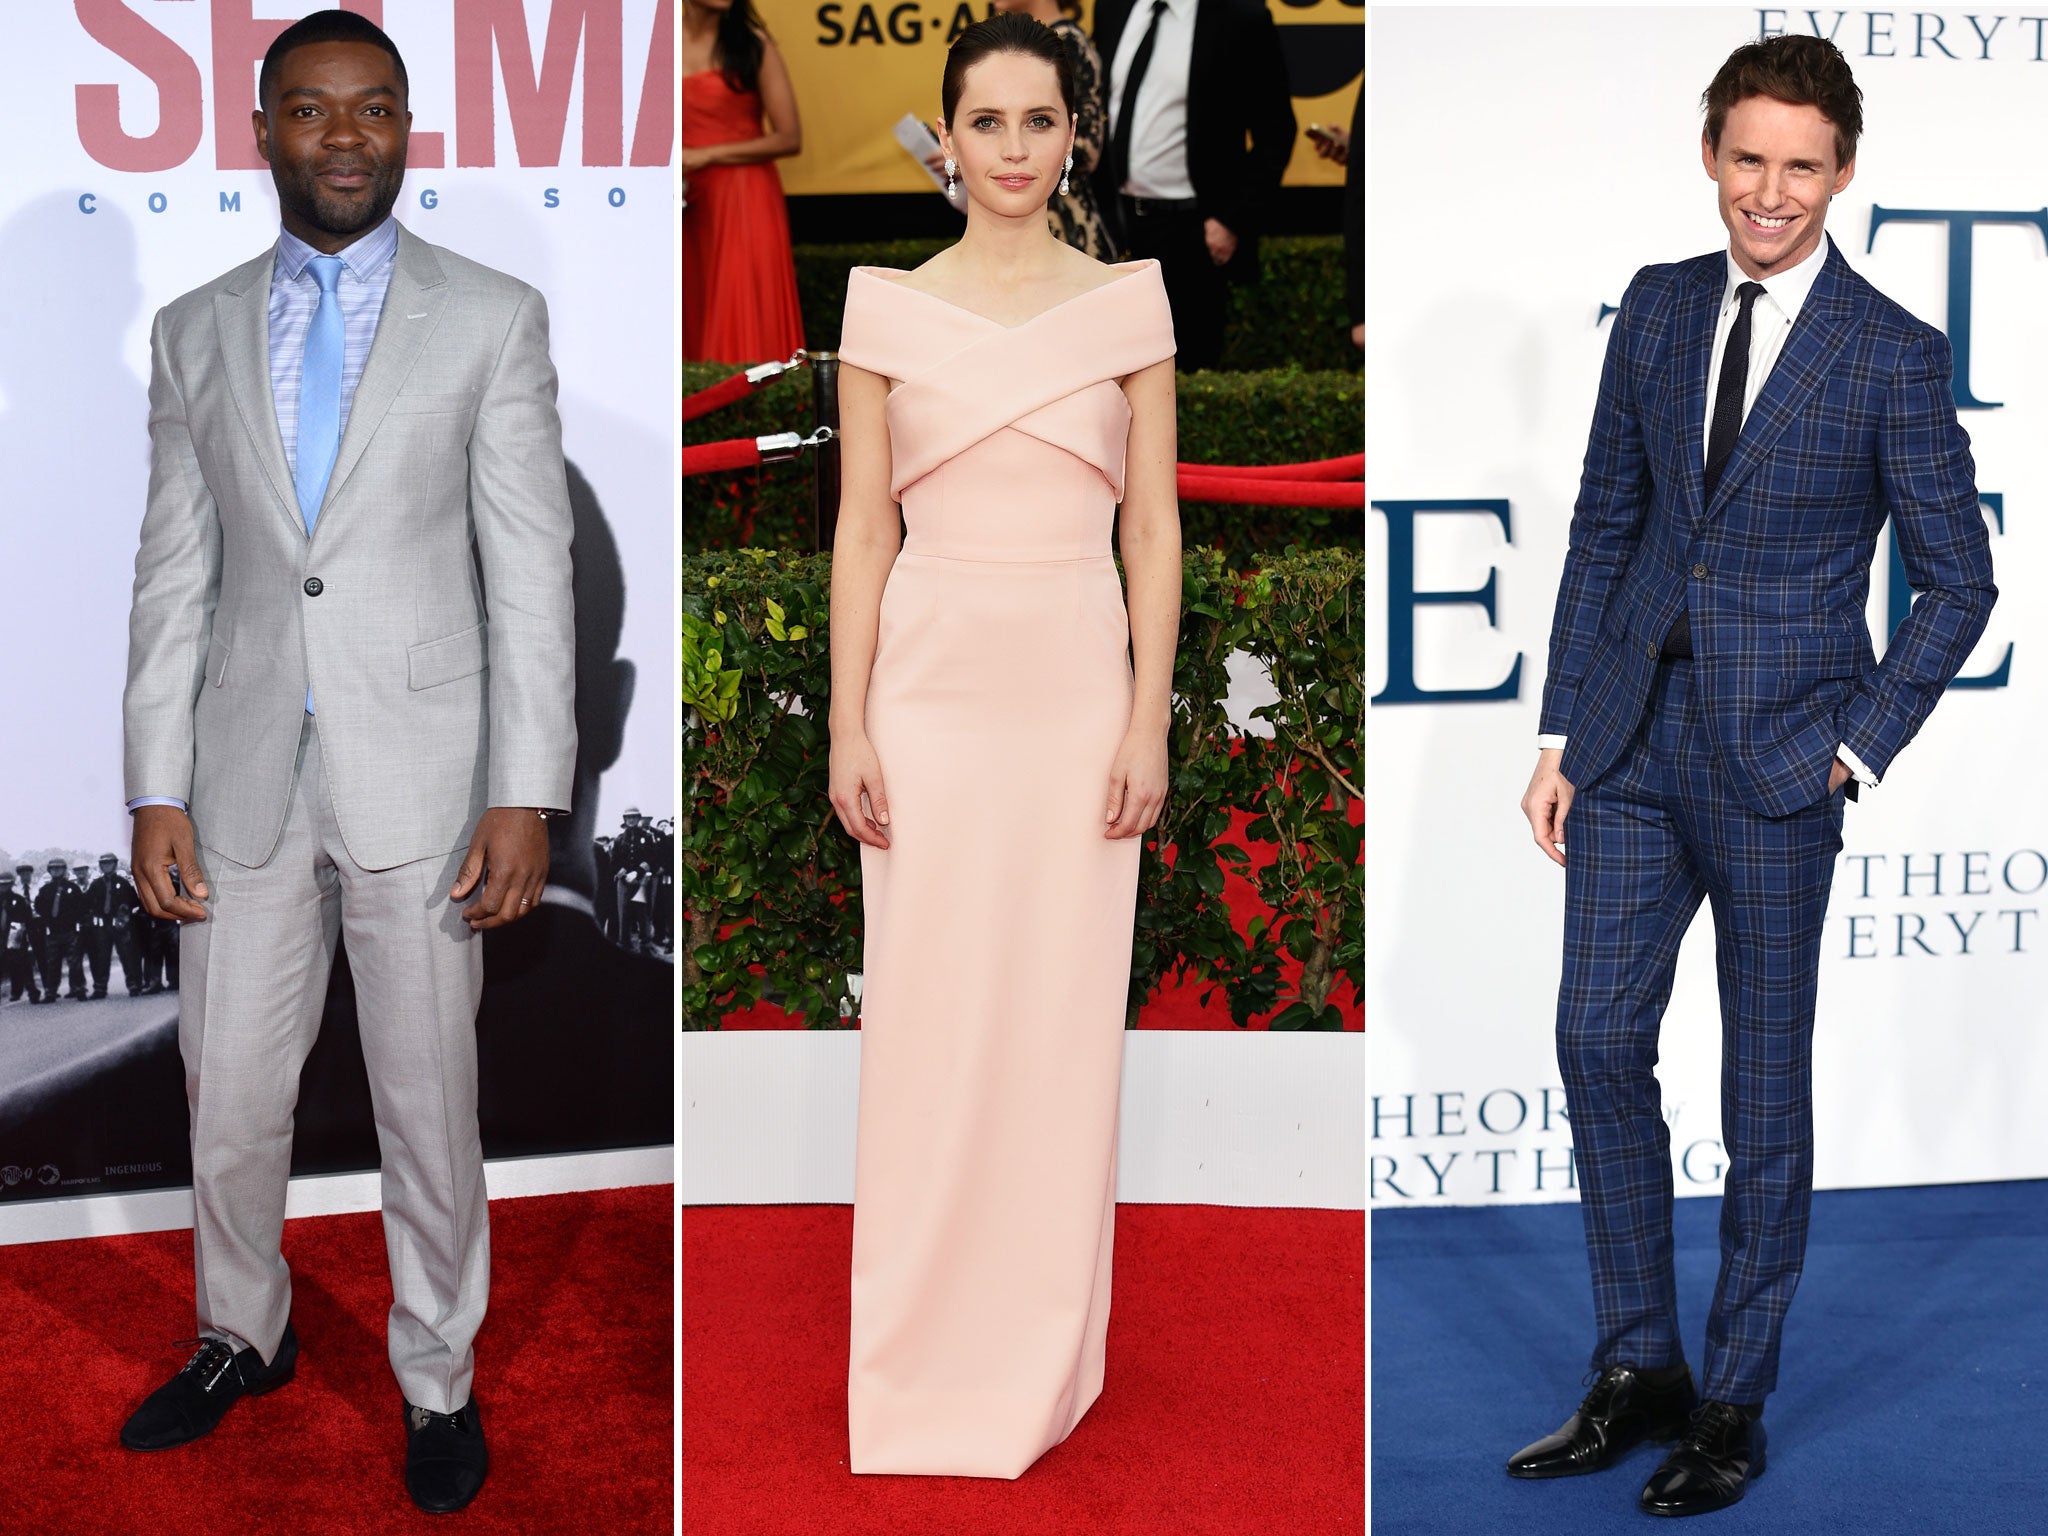 David Oyelowo, Felicity Jones and Eddie Redmayne are three of the five Brits included in the 'Vanity Fair' Hollywood gatefold